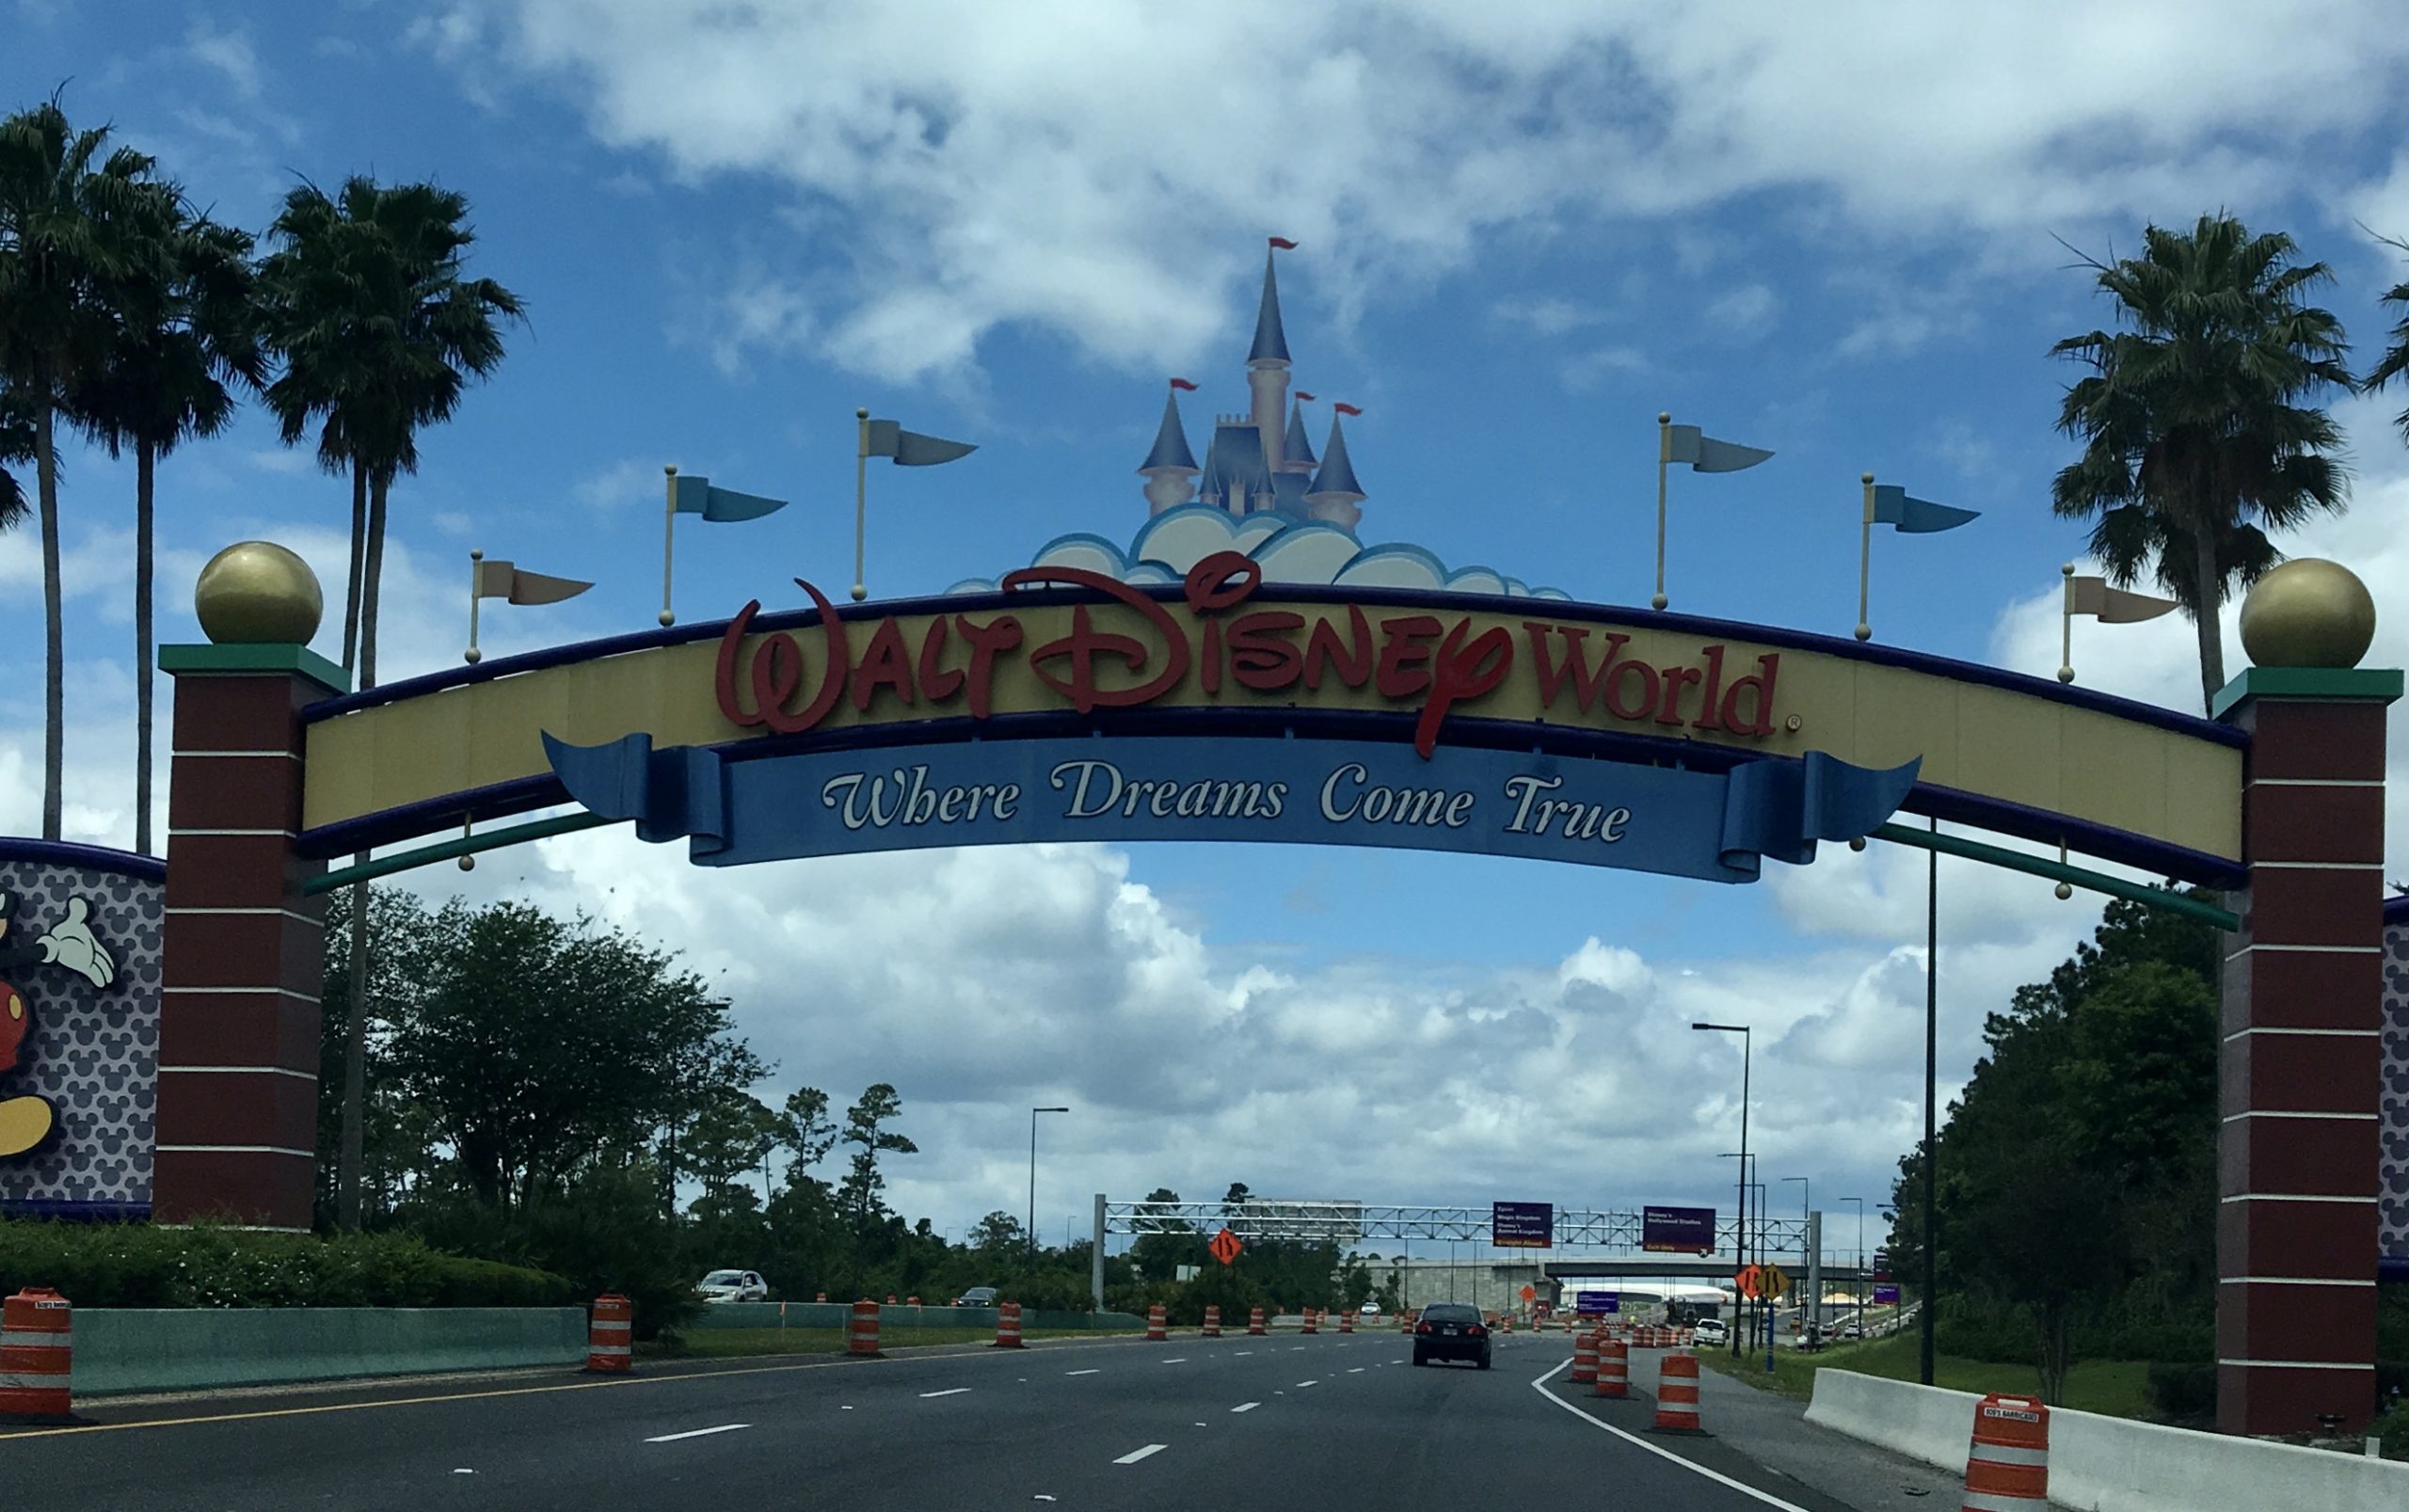 Make Quarantine Sound a Little More Magical with Disney Ride Music